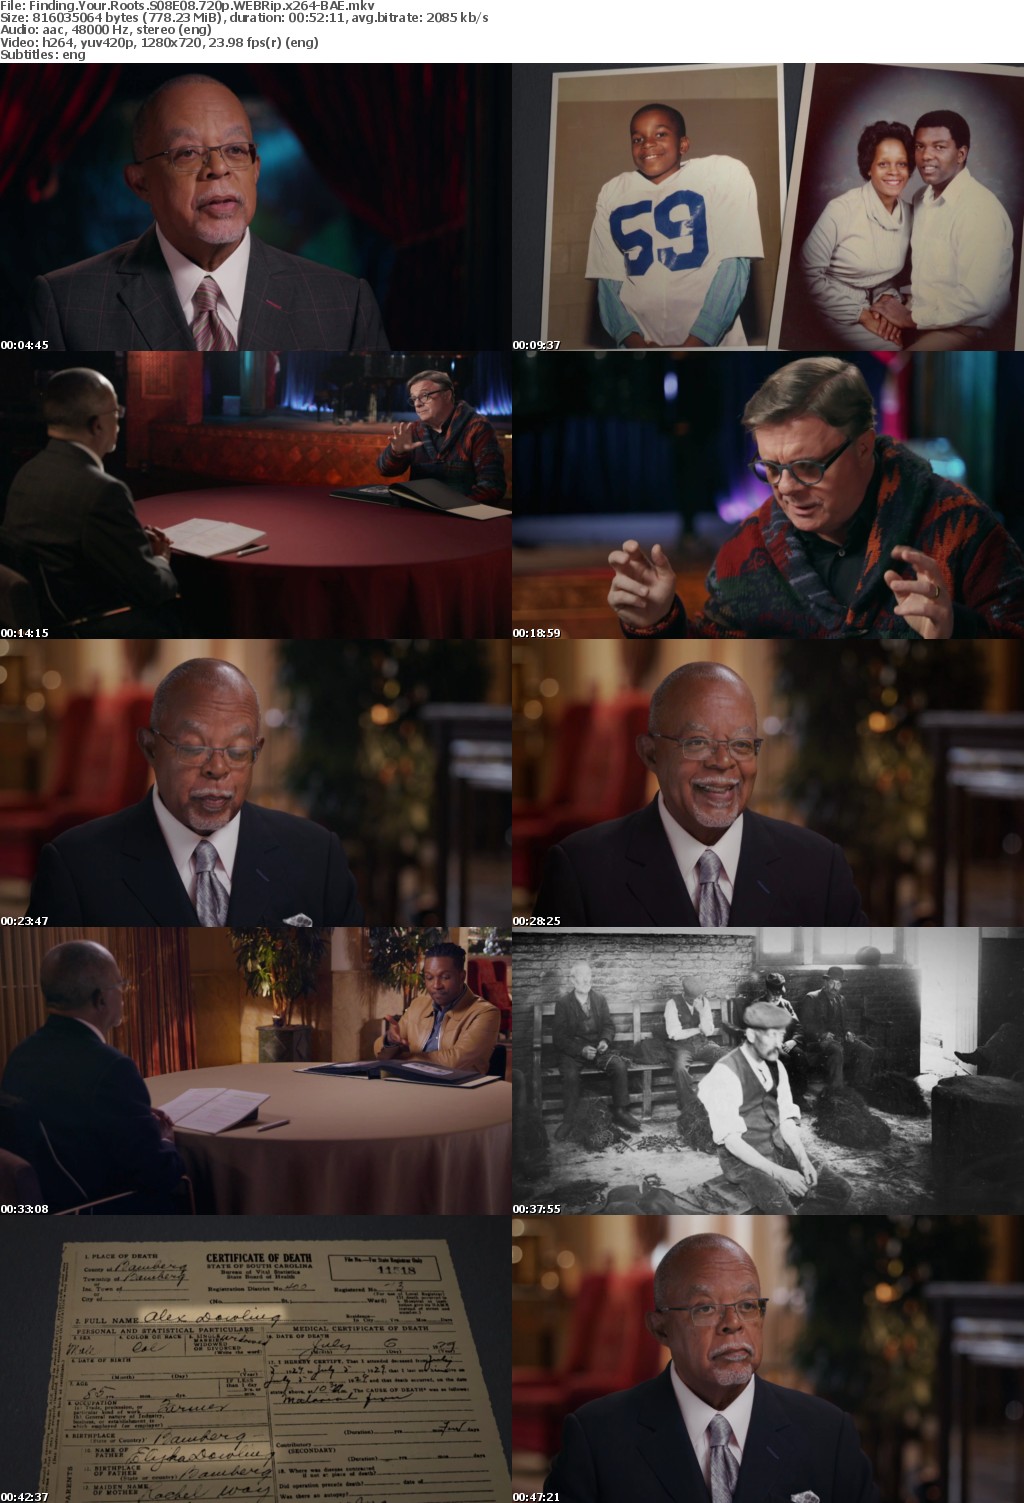 Finding Your Roots S08E08 720p WEBRip x264-BAE